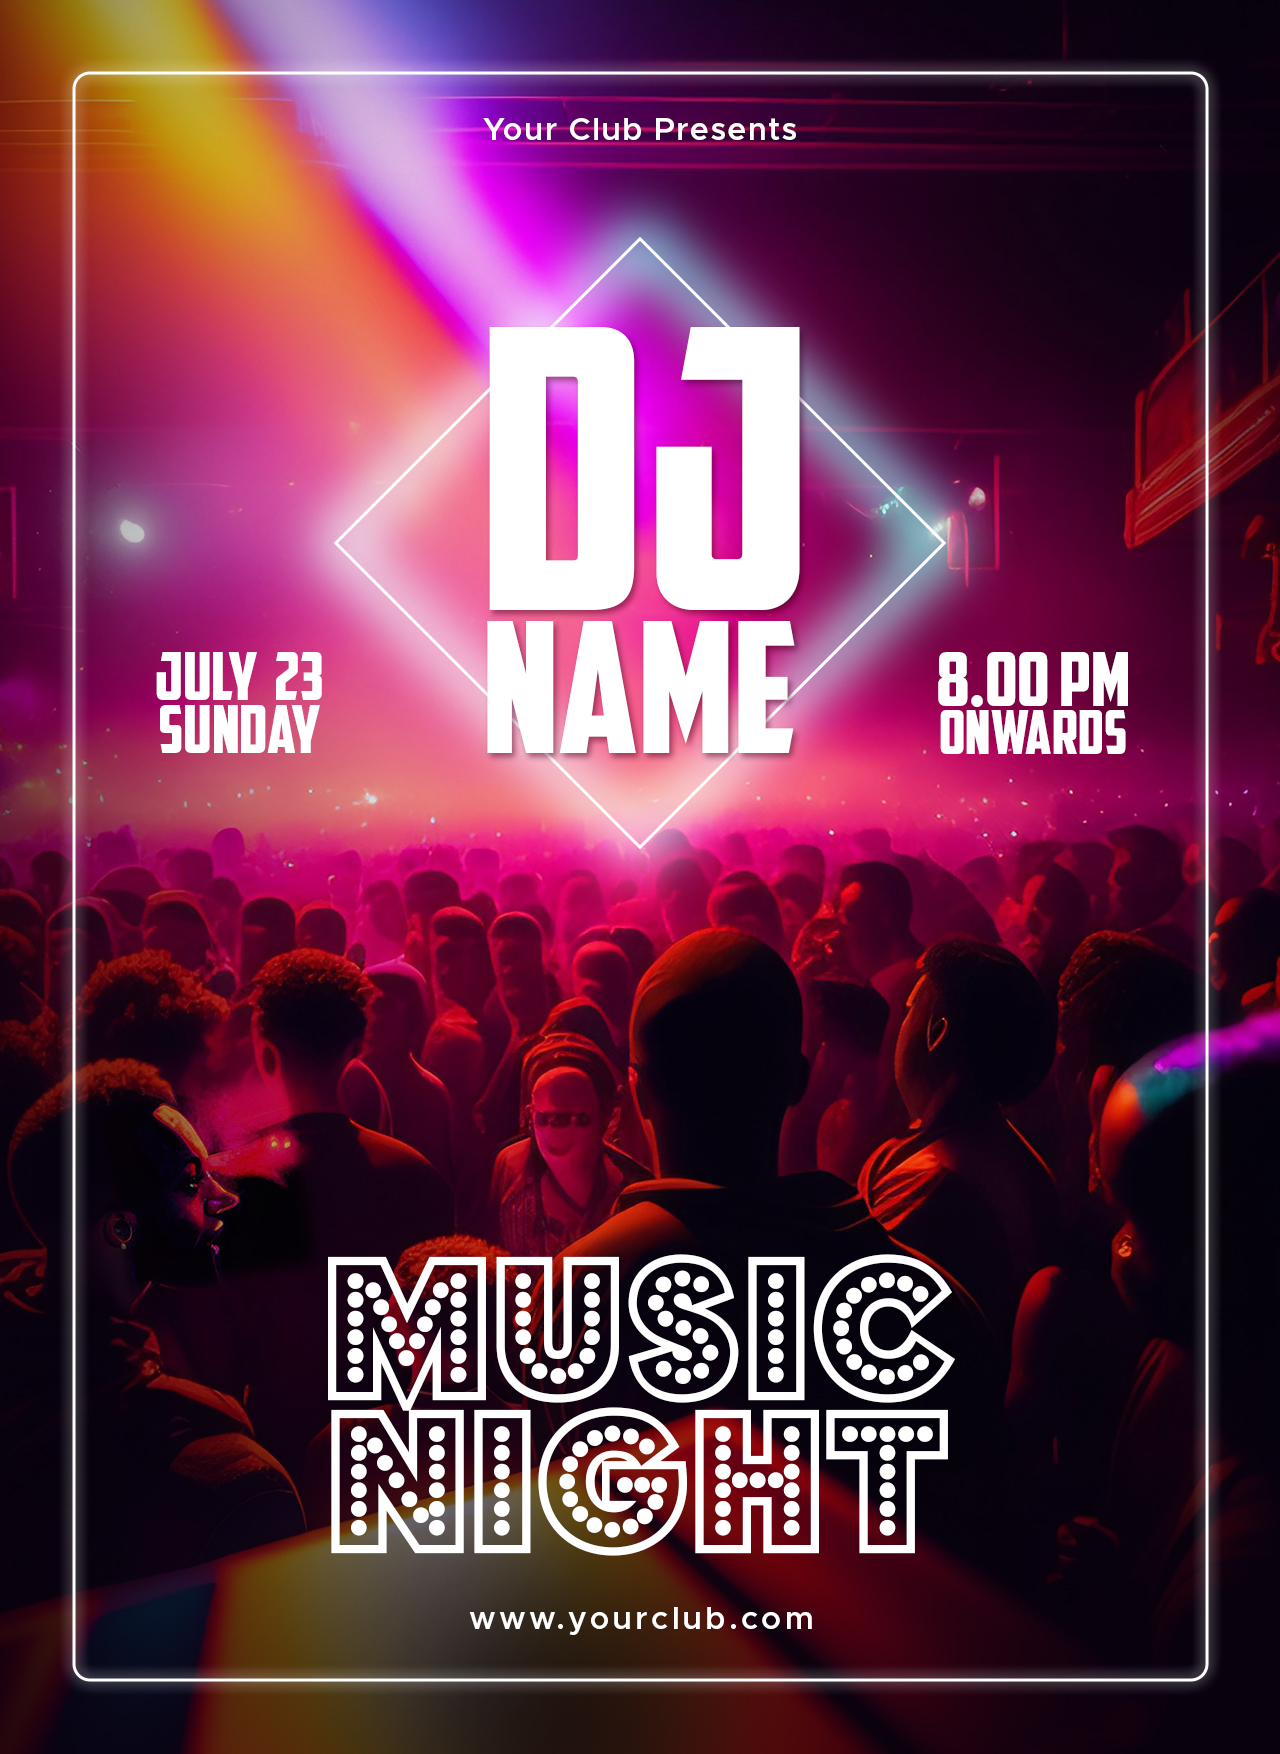 Party Night Poster Template